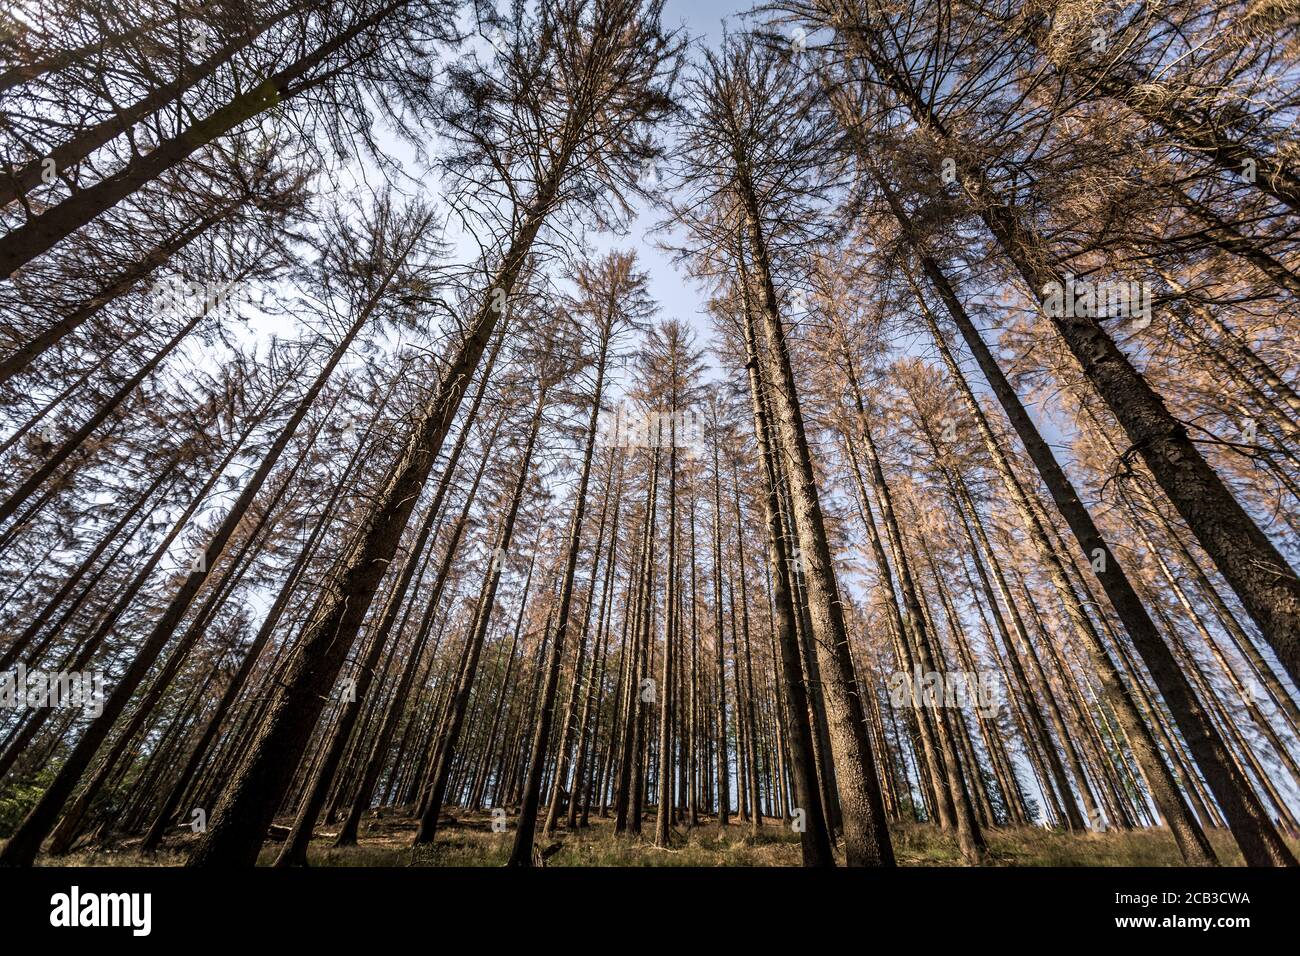 Forest dieback in the Sauerland. Whole spruce forests near Luedenscheid in the Sauerland region have been damaged by the bark beetle and died. The infested trees must be cut down quickly so that the beetle cannot spread further to infest other weakened trees. The great drought in the forests also causes the trees to die. © Frank Schultze / Zeitenspiegel Stock Photo